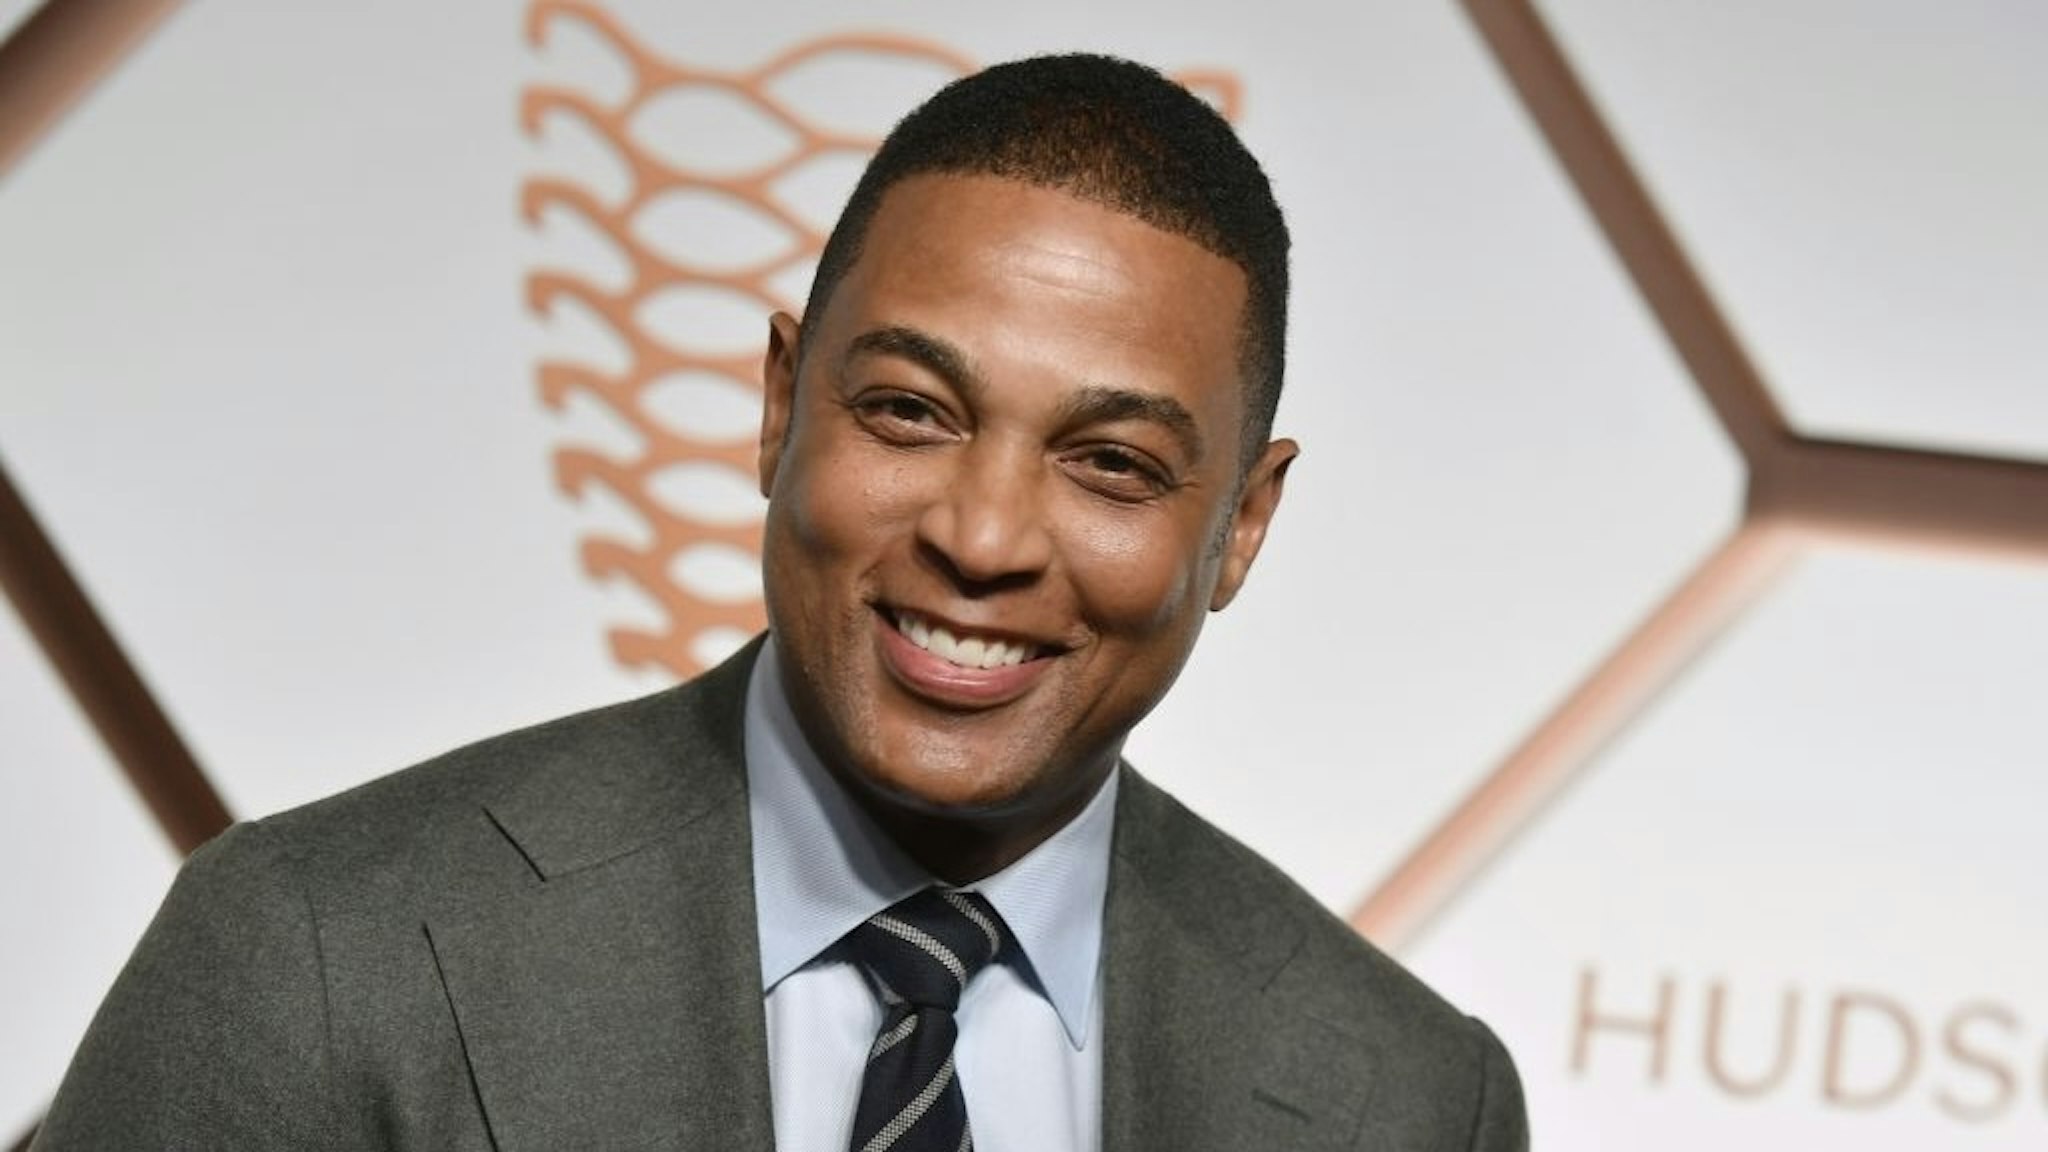 US-HOUSING-ARCHITECTURE-ENTERTAINMENT-HUDSON YARDS US journalist Don Lemon attends The Shops & Restaurants at Hudson Yards Preview Celebration Event on March 14, 2019 in New York City. (Photo by Angela Weiss / AFP) (Photo credit should read ANGELA WEISS/AFP via Getty Images) ANGELA WEISS / Contributor via Getty Images